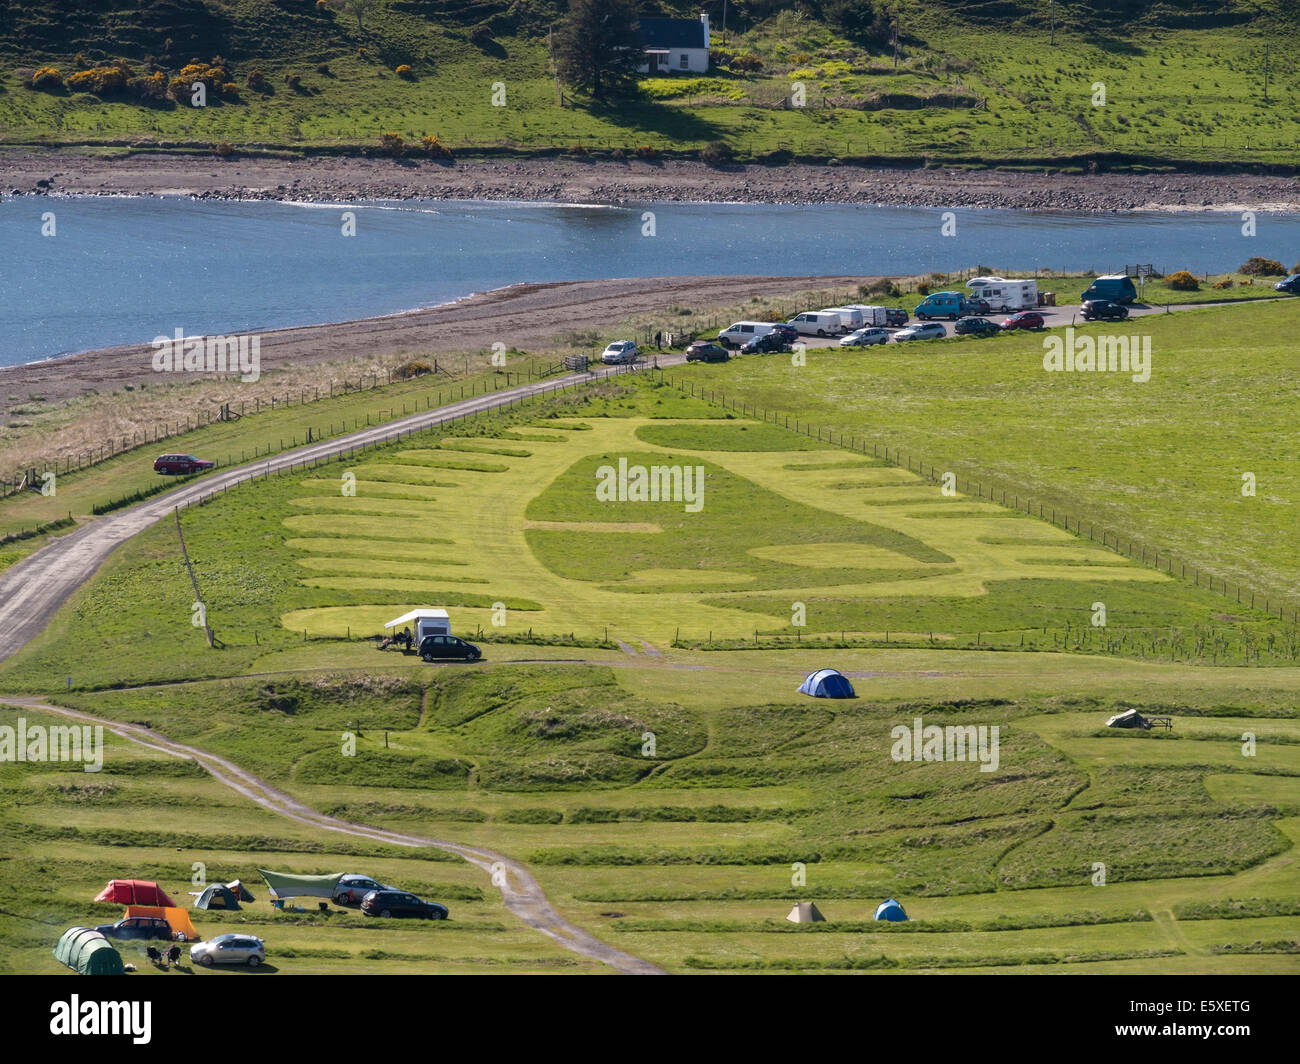 Unusual pattern of mown grass camping pitches, Glenbrittle campsite, Isle of Skye, Scotland, UK Stock Photo